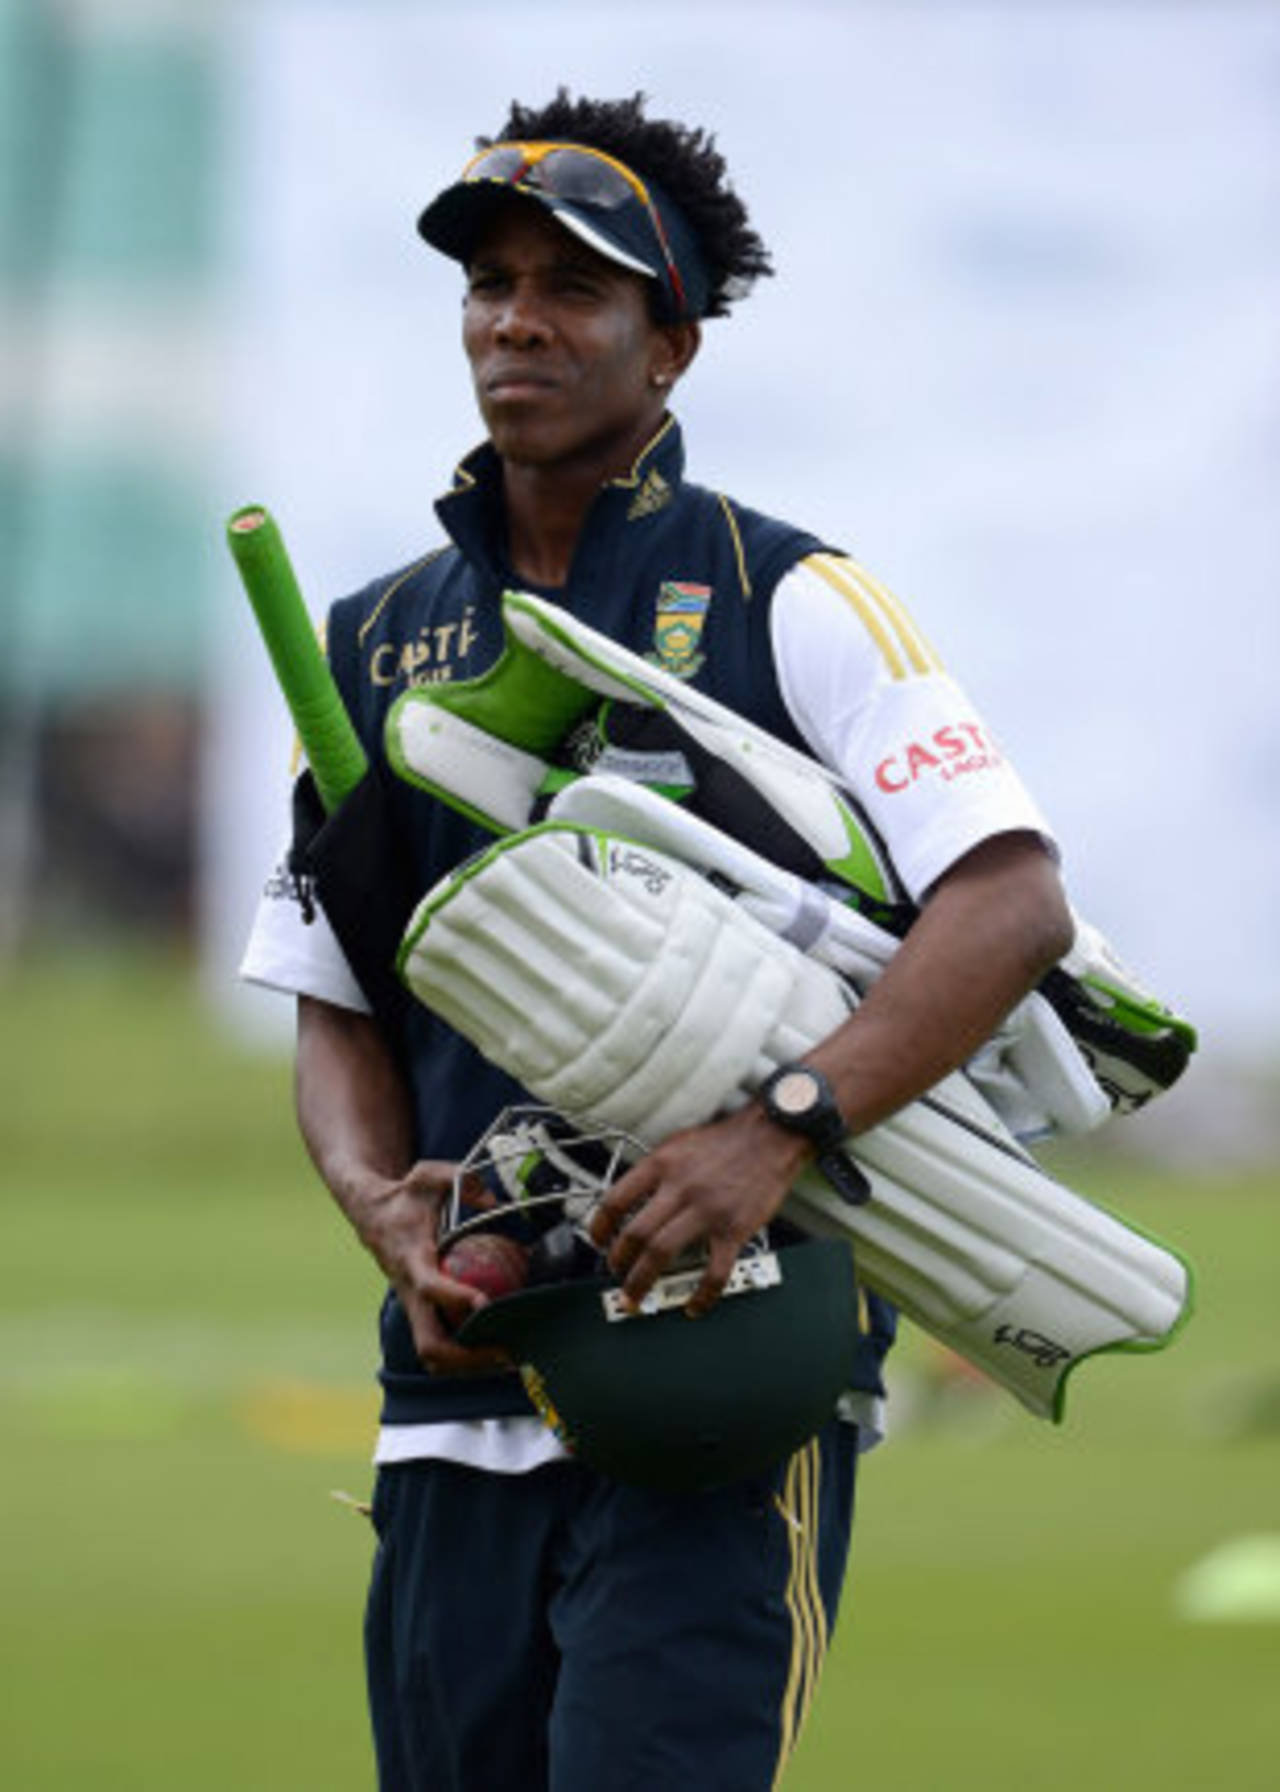 South Africa's Thami Tsolekile heads to practice, The Oval, London, July 17, 2012